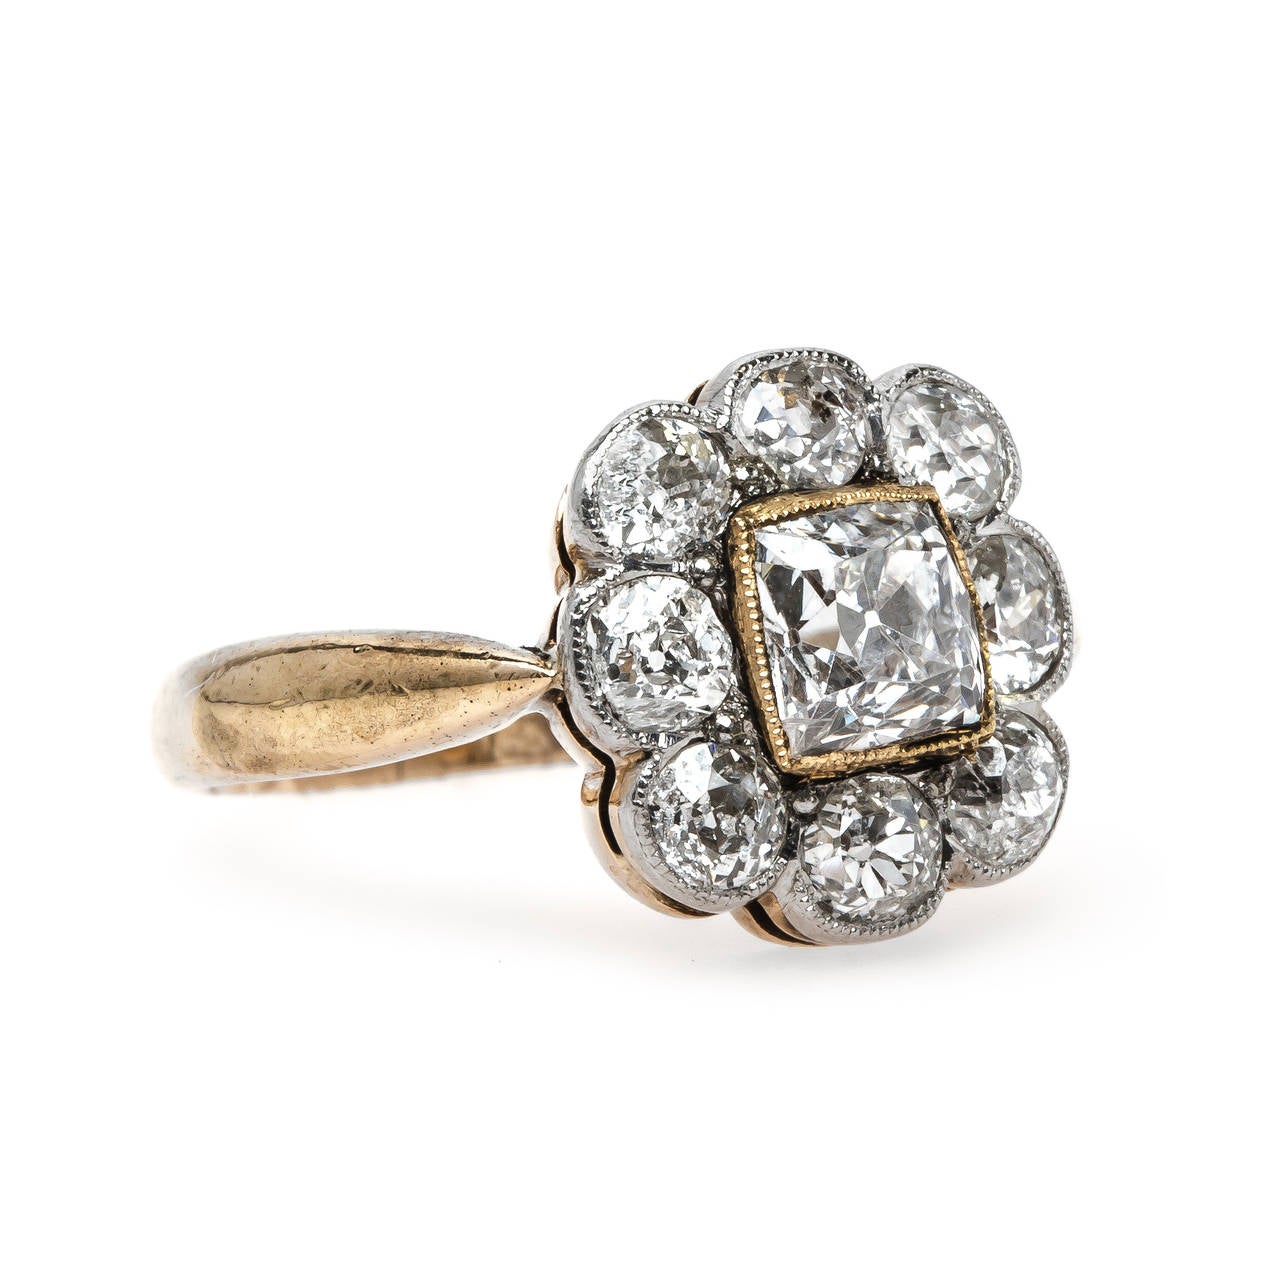 Granada is a wonderfully unique Victorian era (circa 1880) platinum topped 14k yellow gold halo style engagement ring. The ring centers a bezel set 0.72ct  EGL certified Cushion Square Modified Brilliant Cut diamond graded F color and SI2 clarity. A